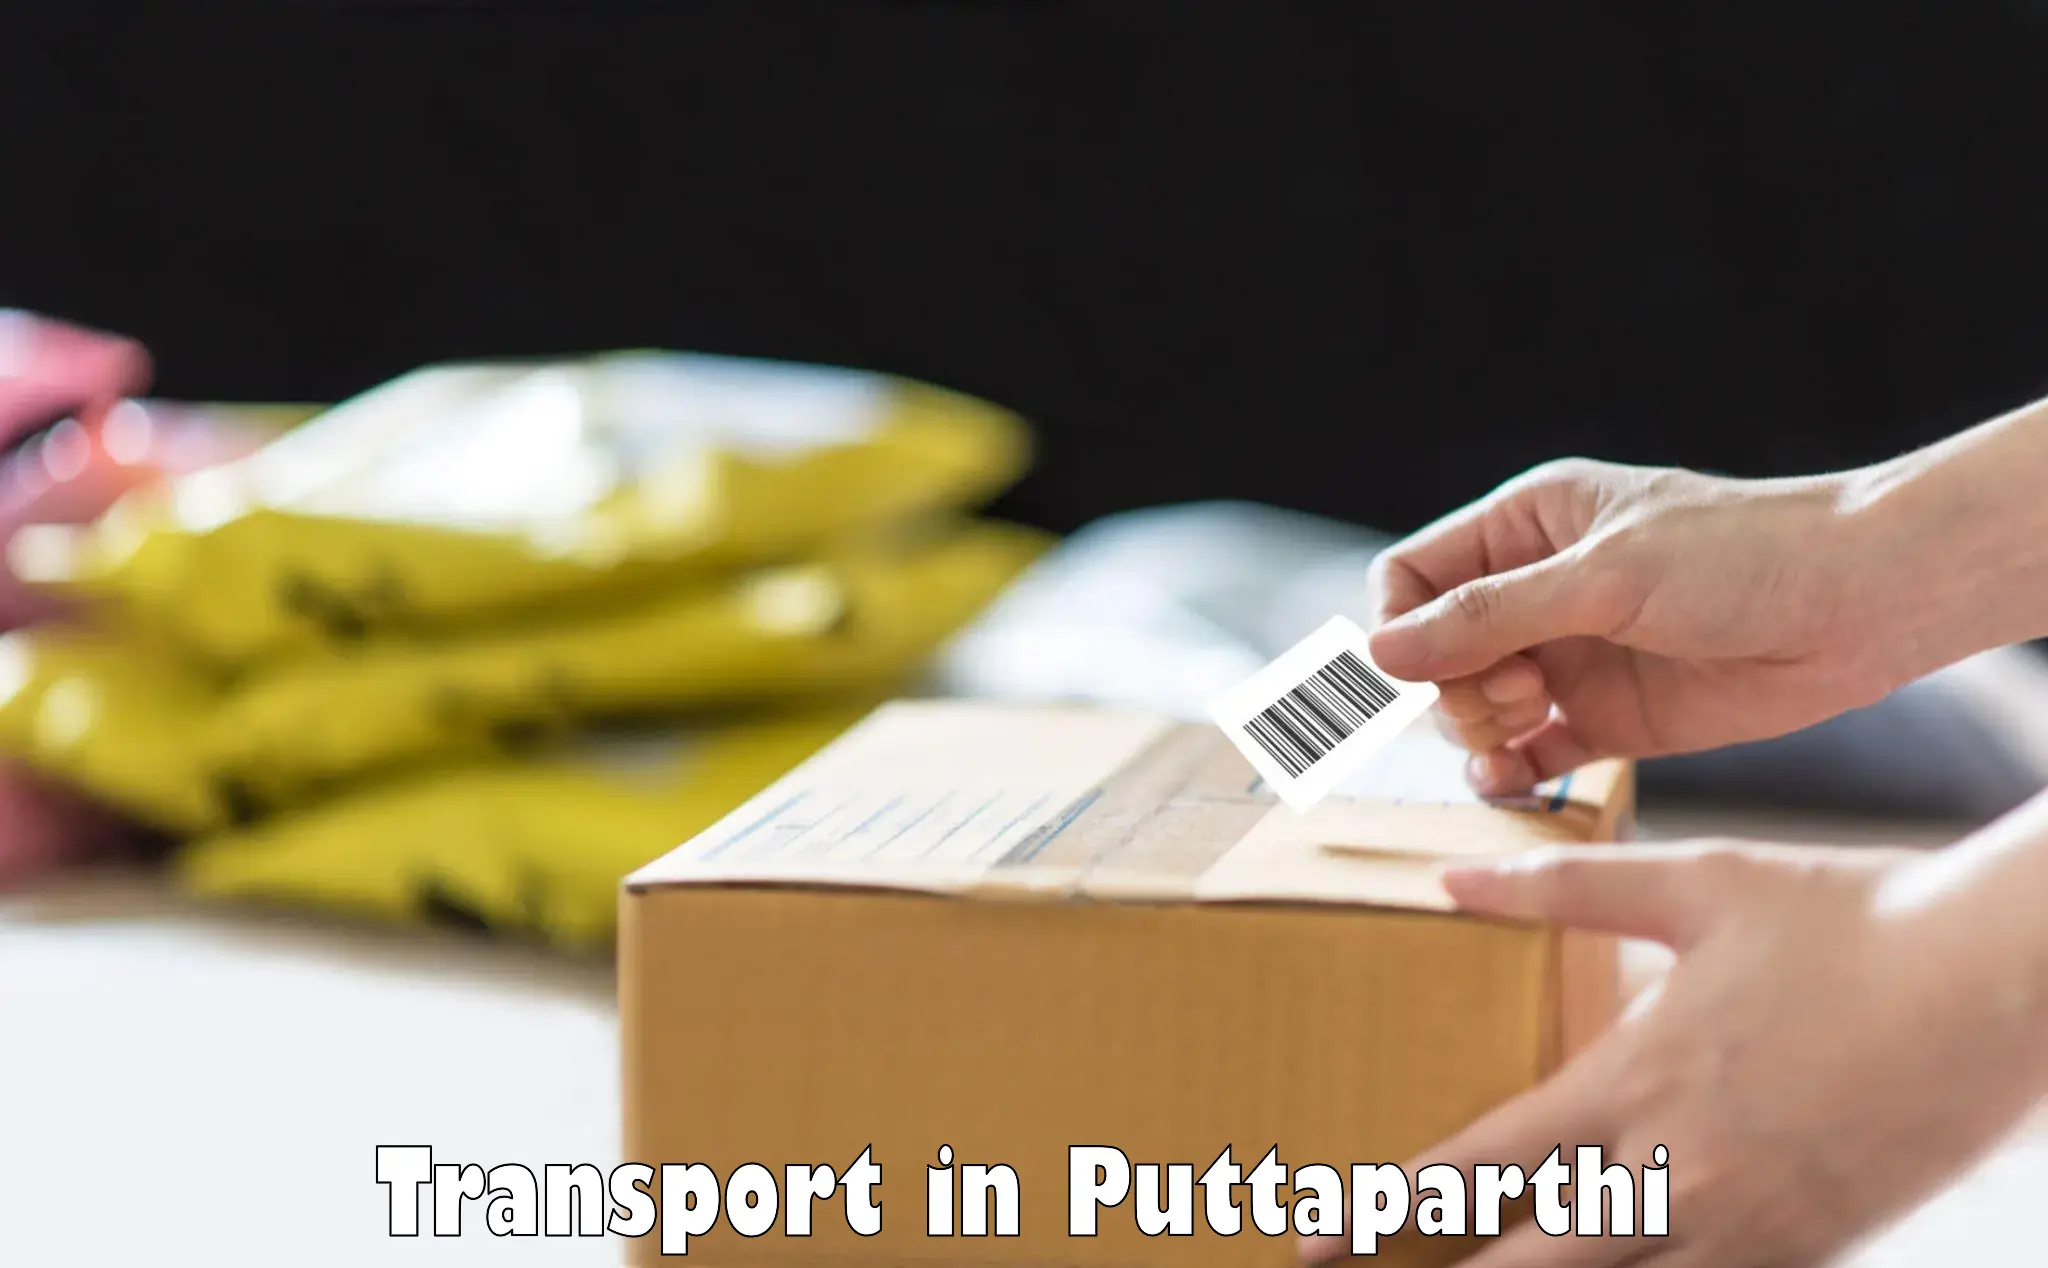 Container transport service in Puttaparthi